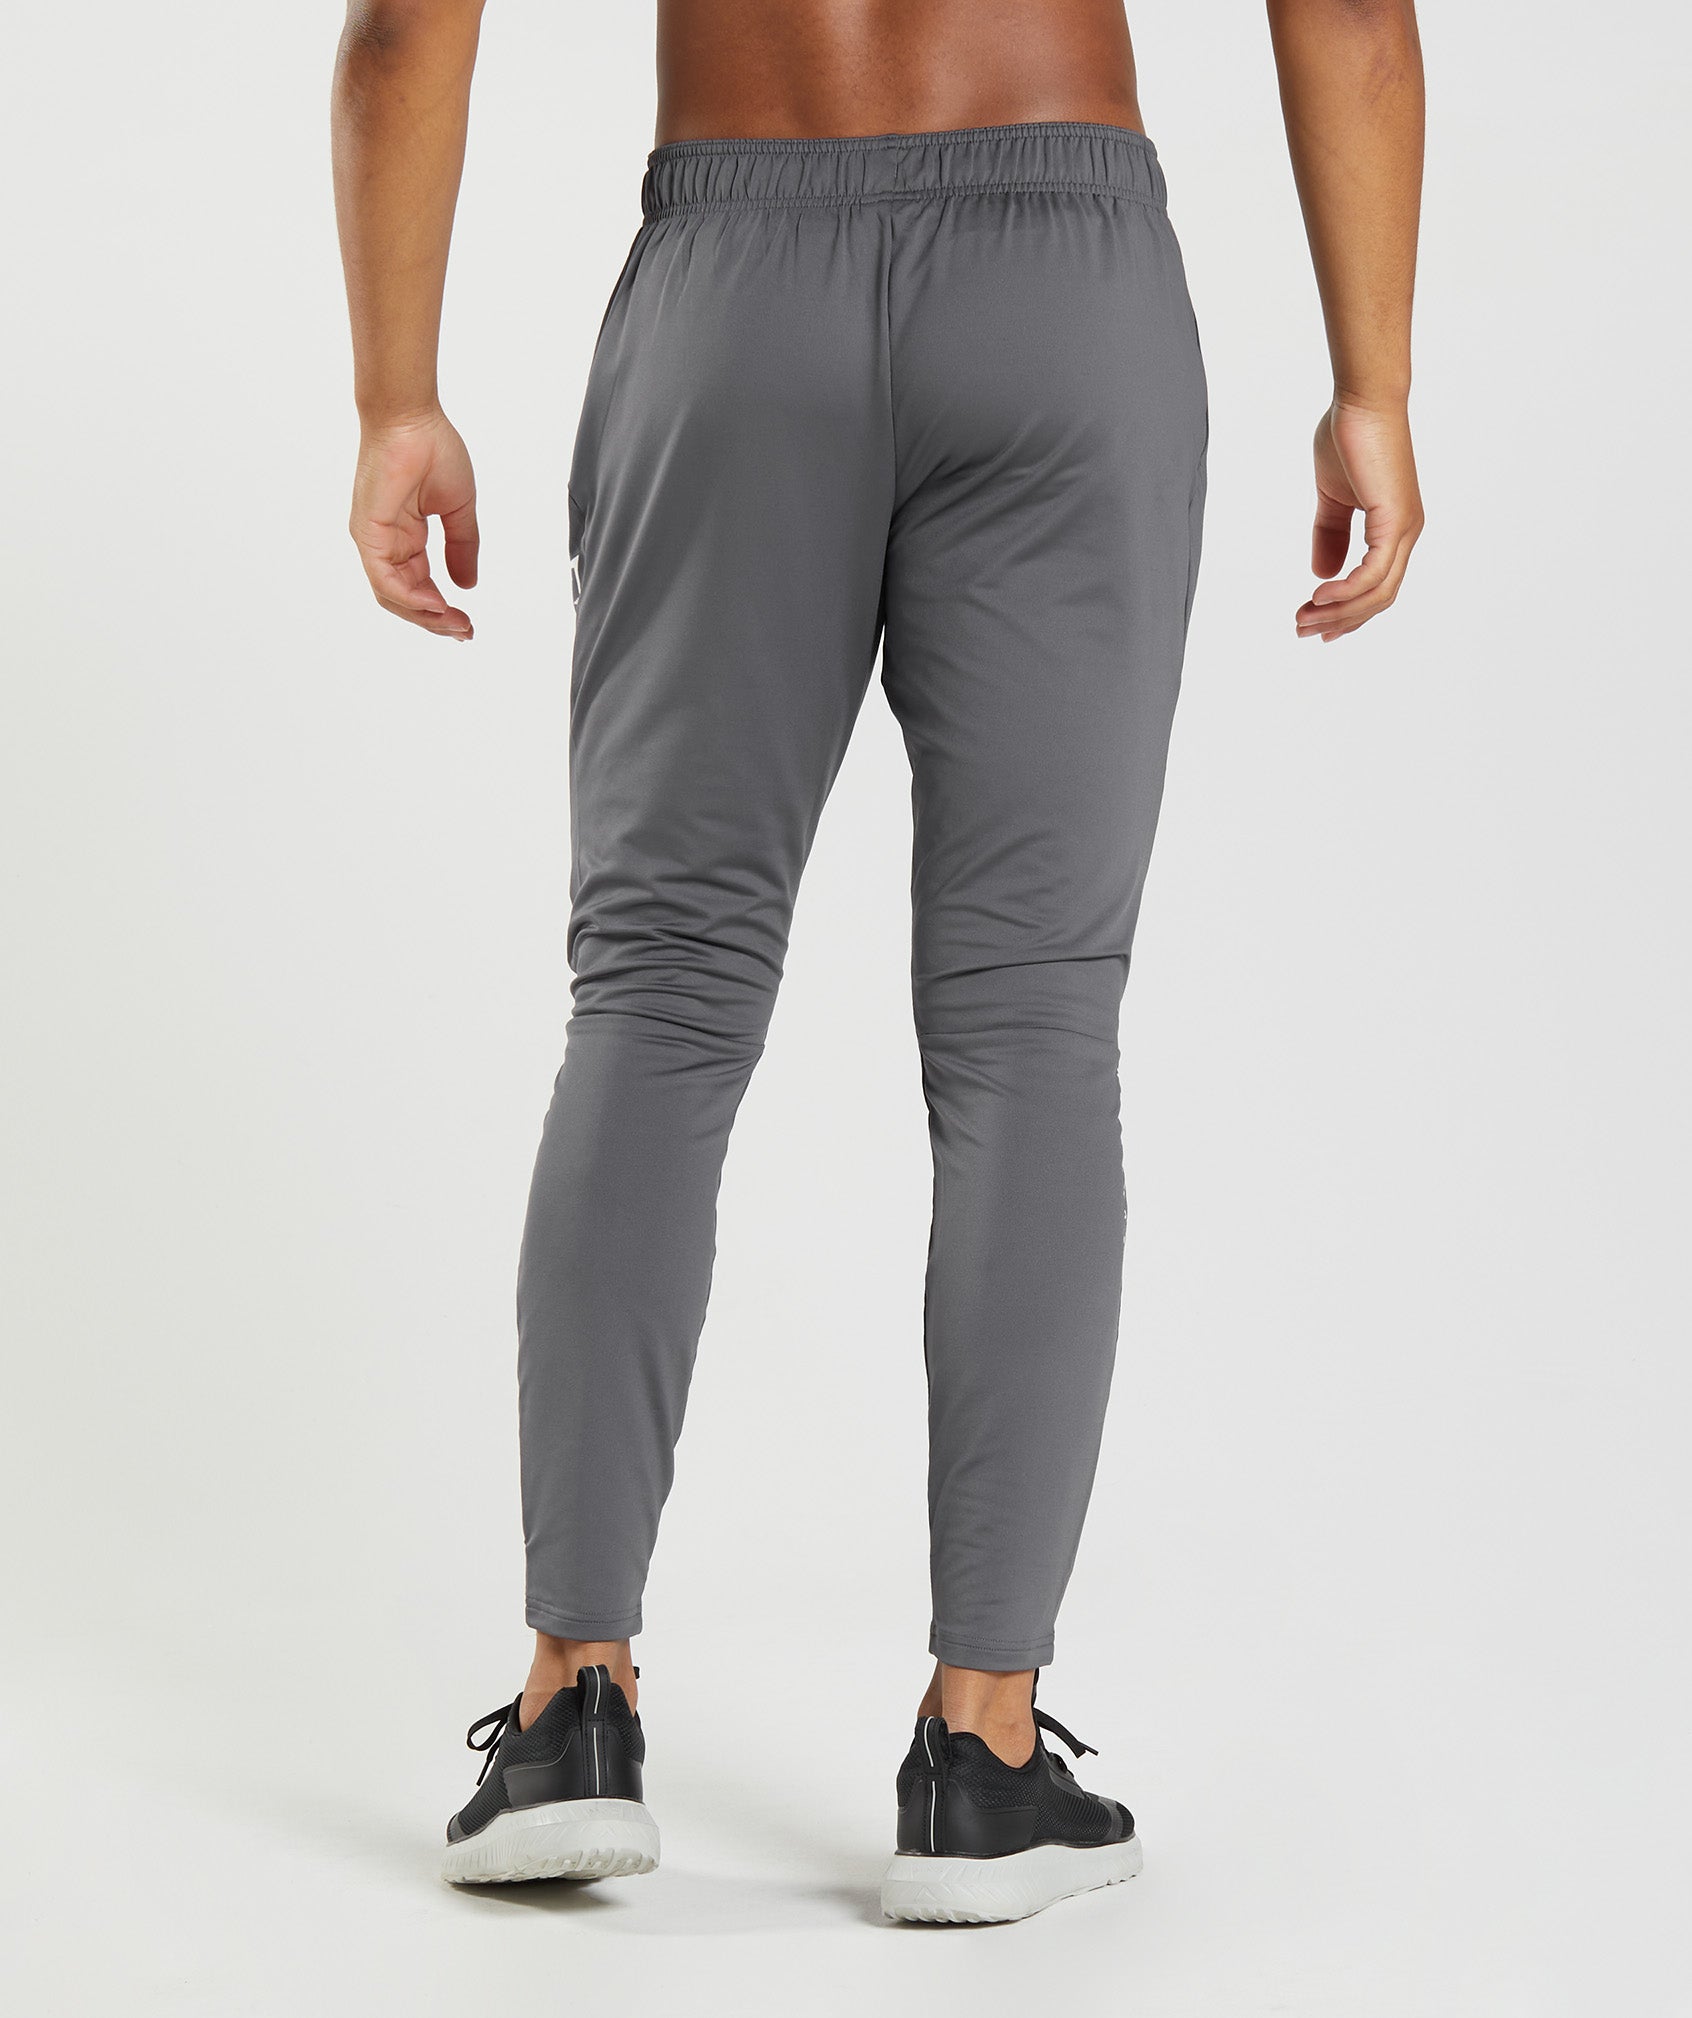 Gymshark Crest Joggers Black Size M - $20 (33% Off Retail) - From Pascal